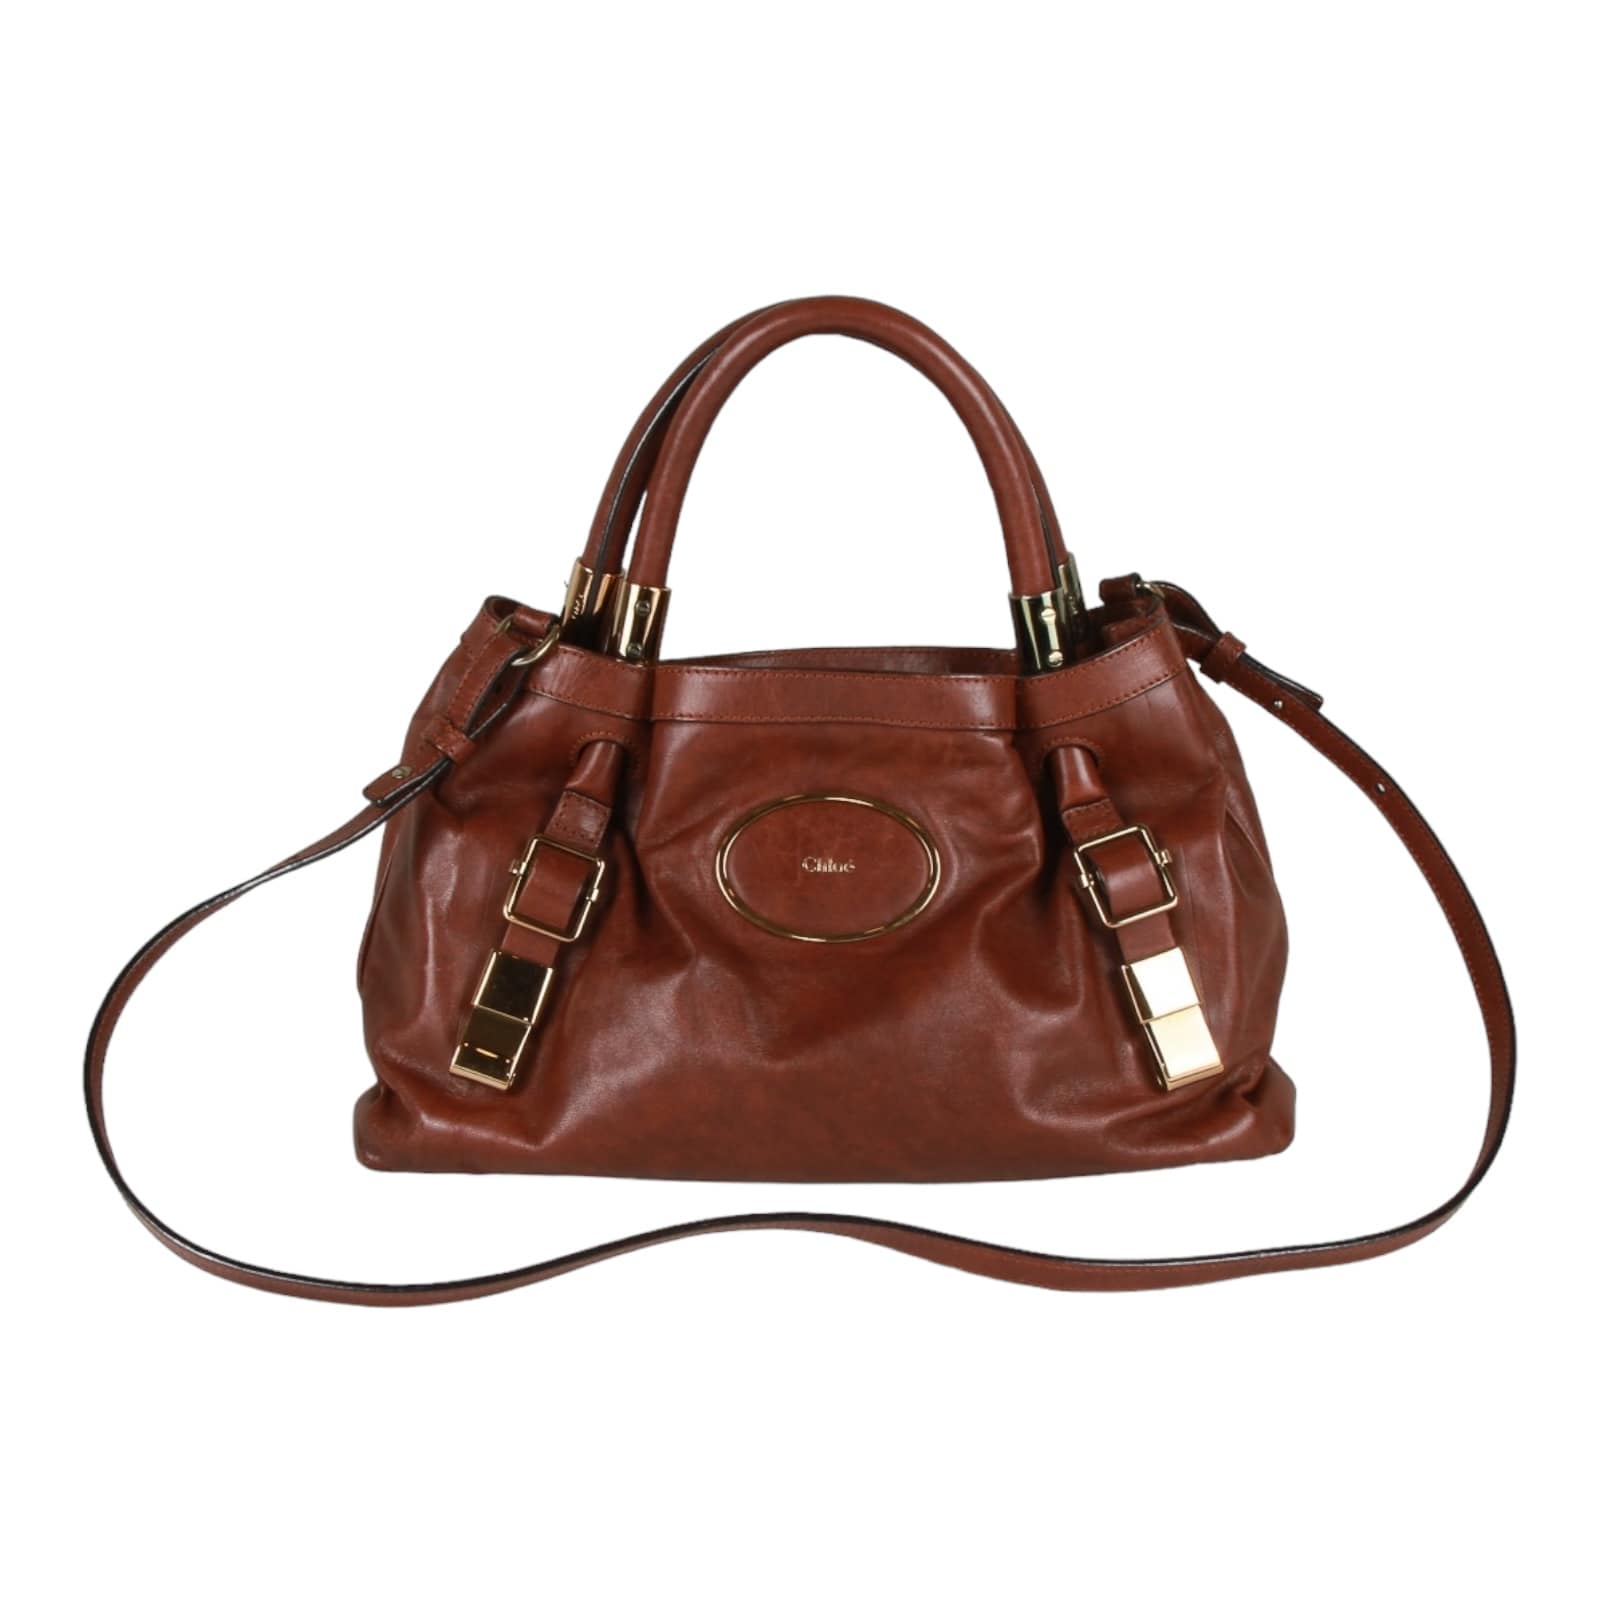 Authentic Chloe brown leather two way bag purse